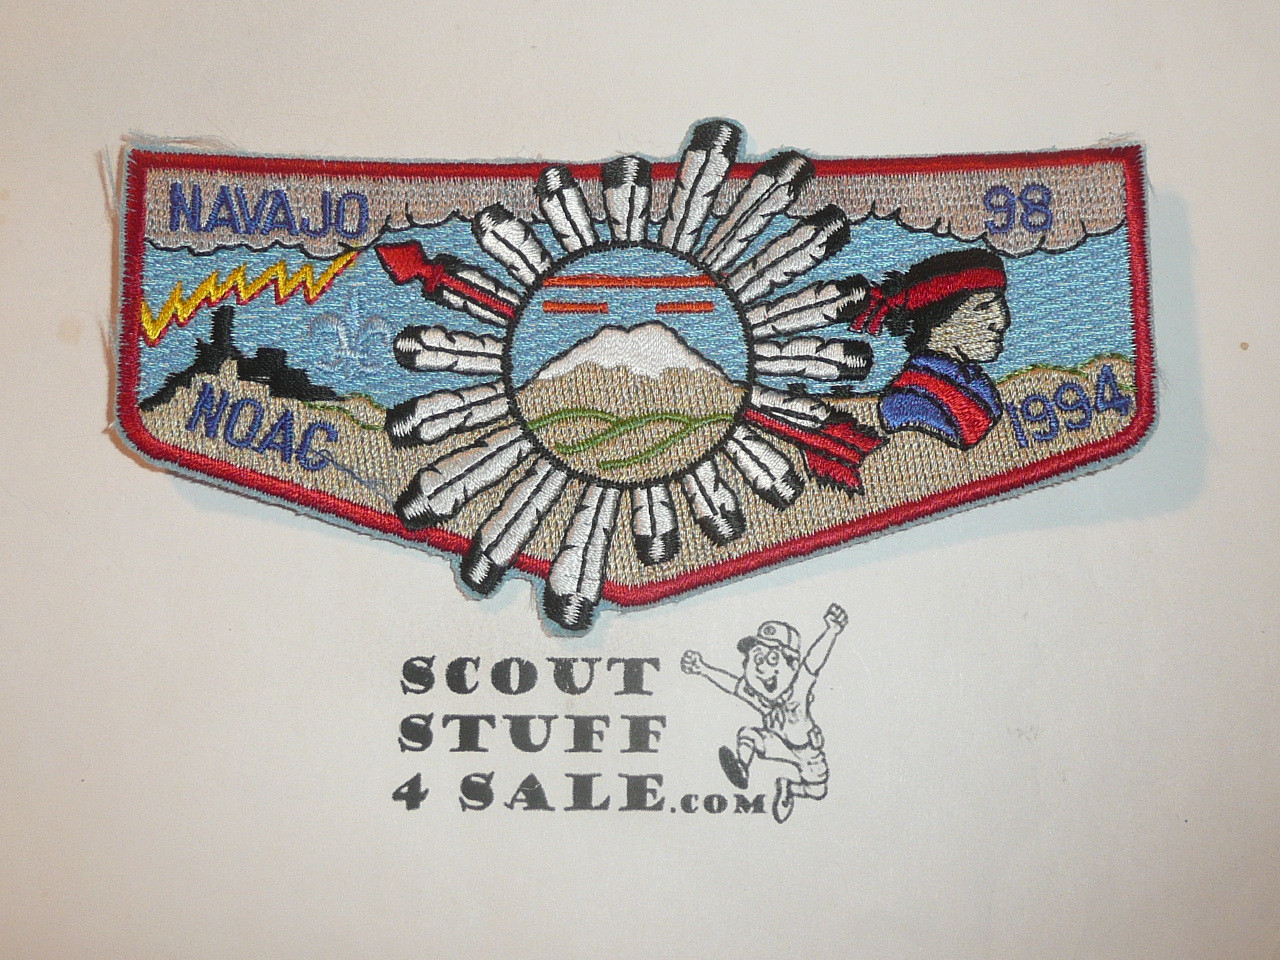 Order of the Arrow Lodge #98 Navajo s31 1994 NOAC Flap Patch